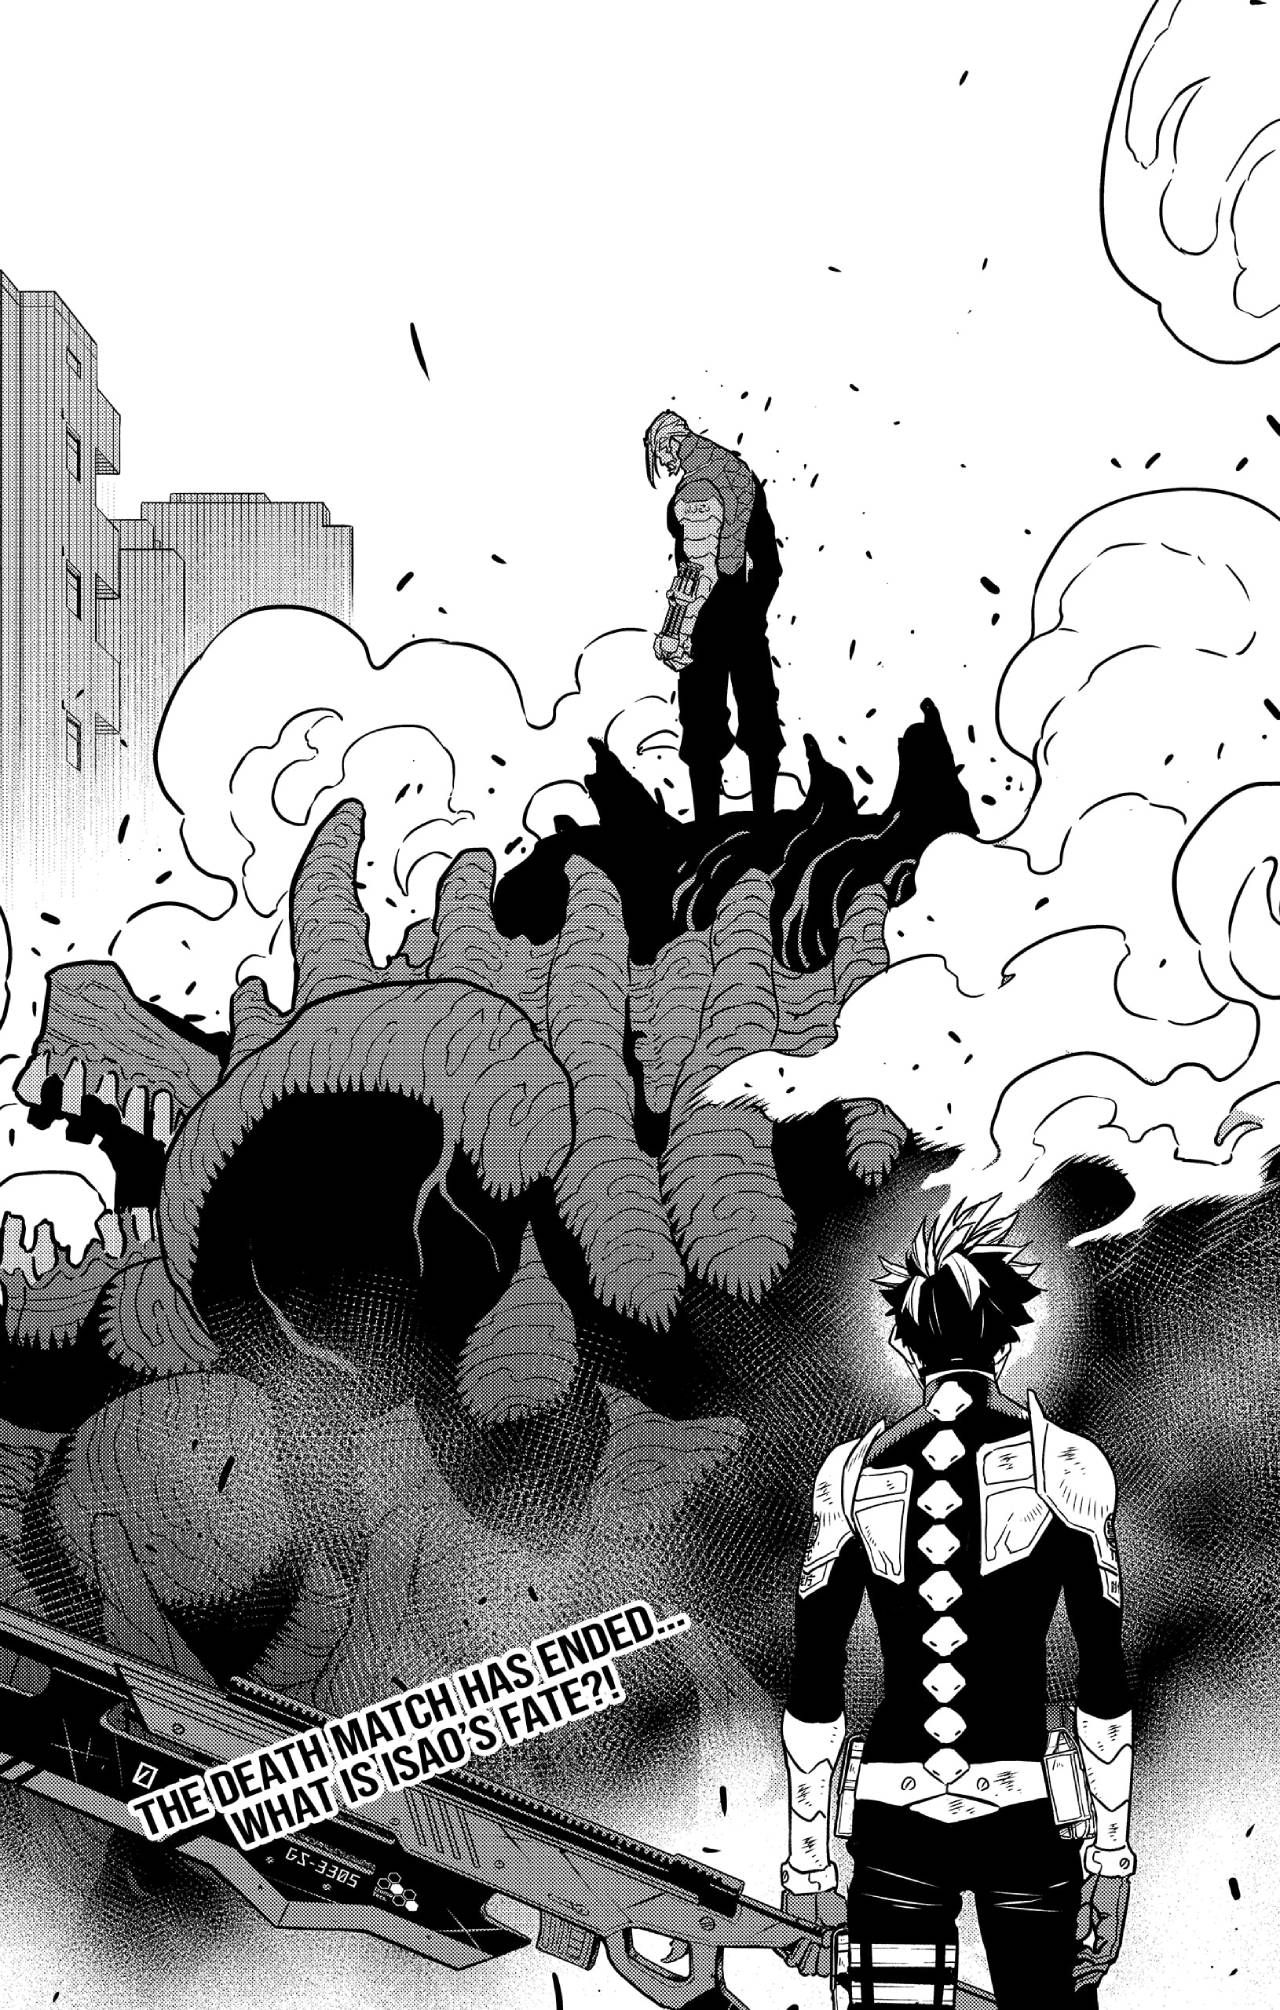 Kaiju no 8 Chapter 51, monster #8 chapter 51